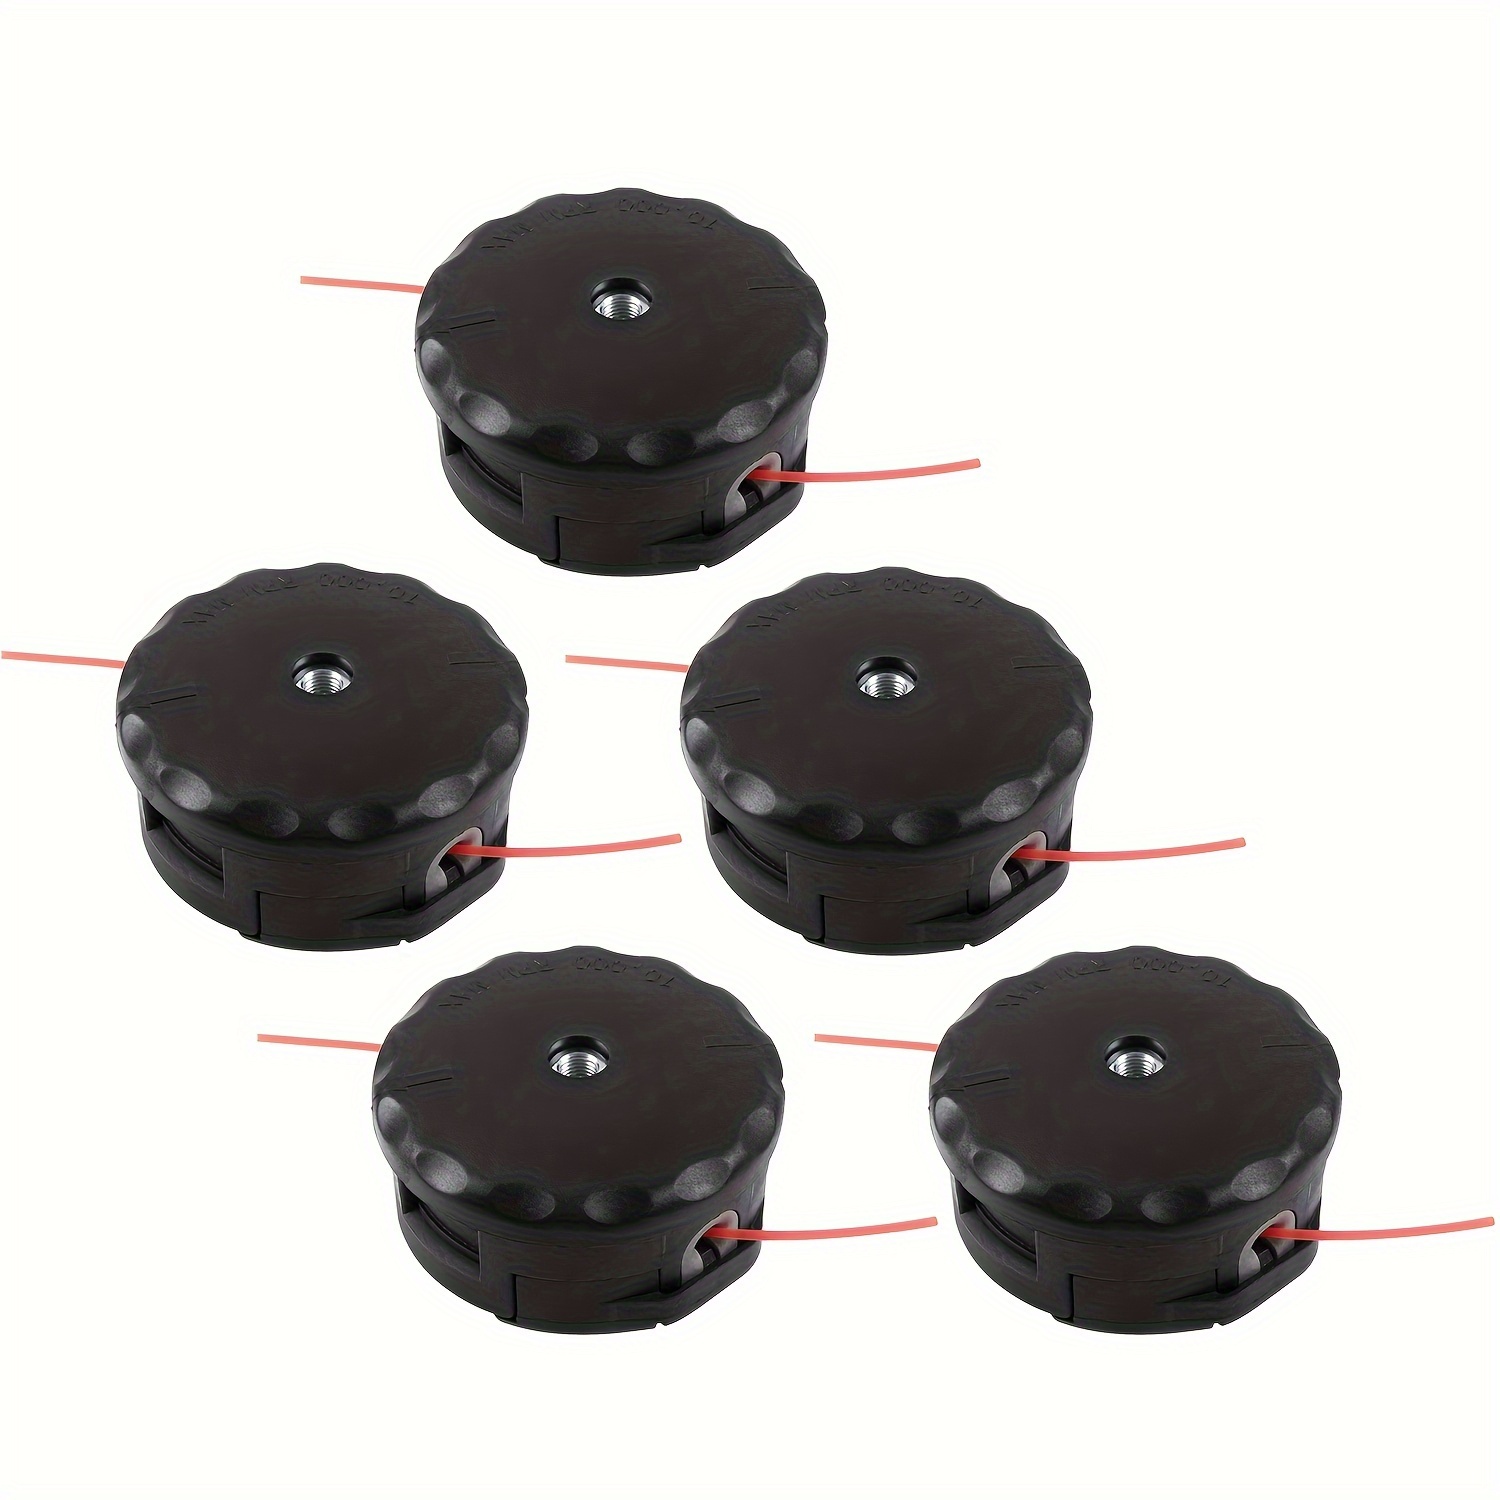 

Ransoto 5 Packs Universal Trimmer Head Compatible With Echo Speed Feed 400 Srm225 Srm210 Srm230 Pas225 Pas210 Pas211